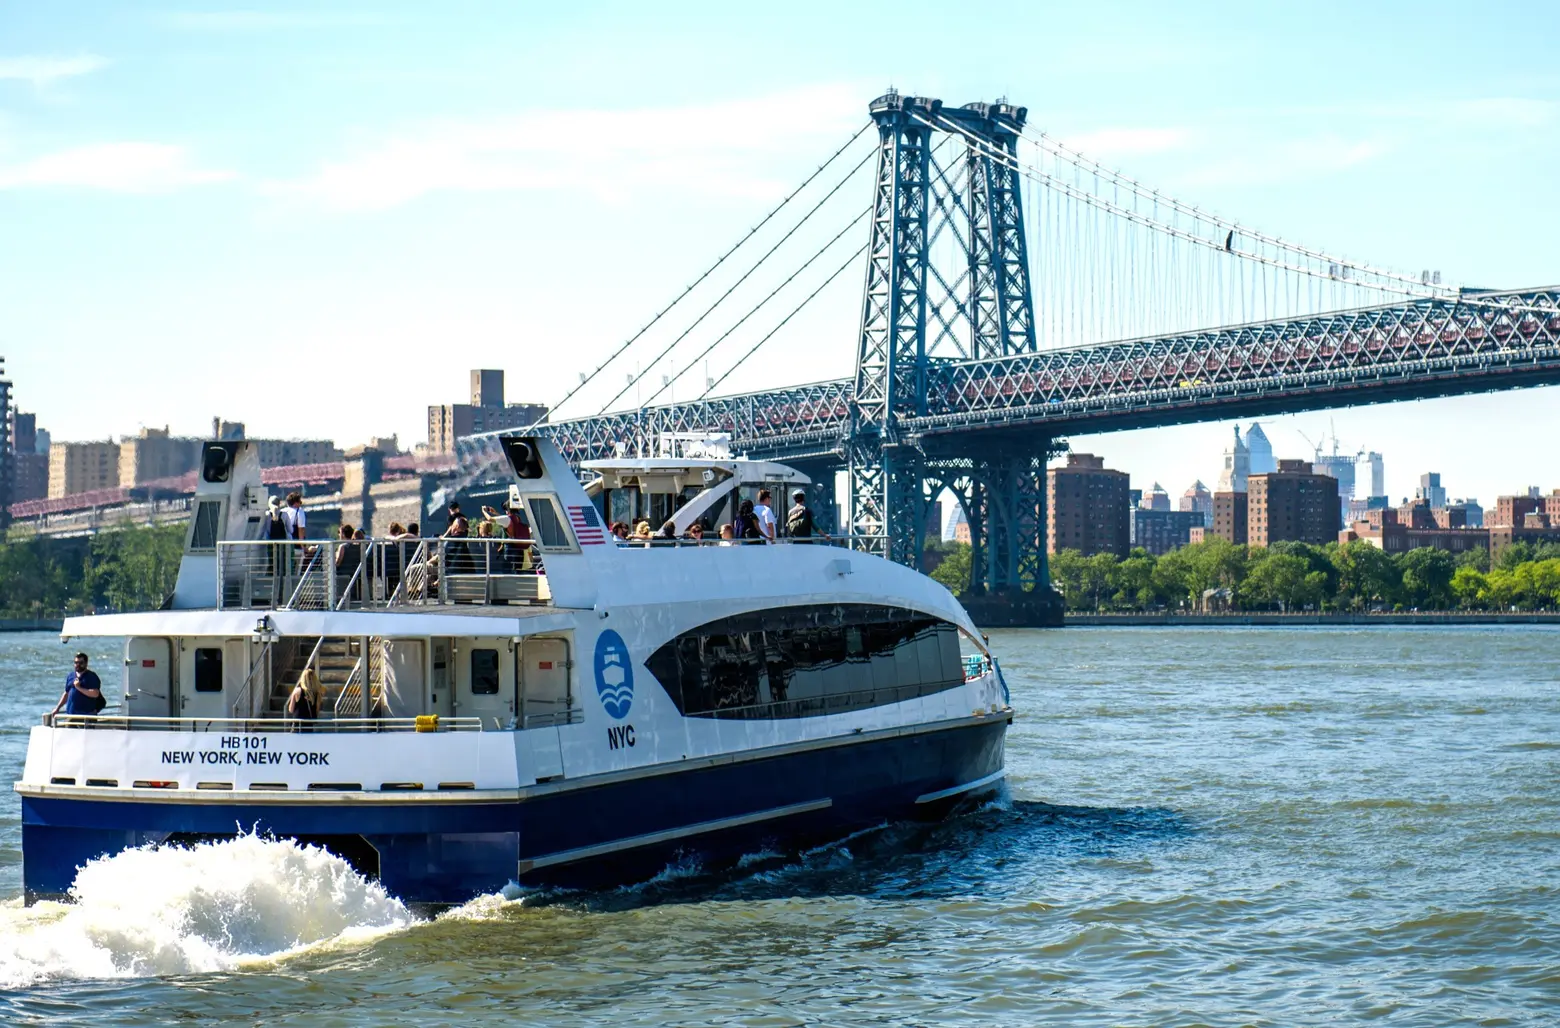 With ridership booming, NYC Ferry could get new express routes